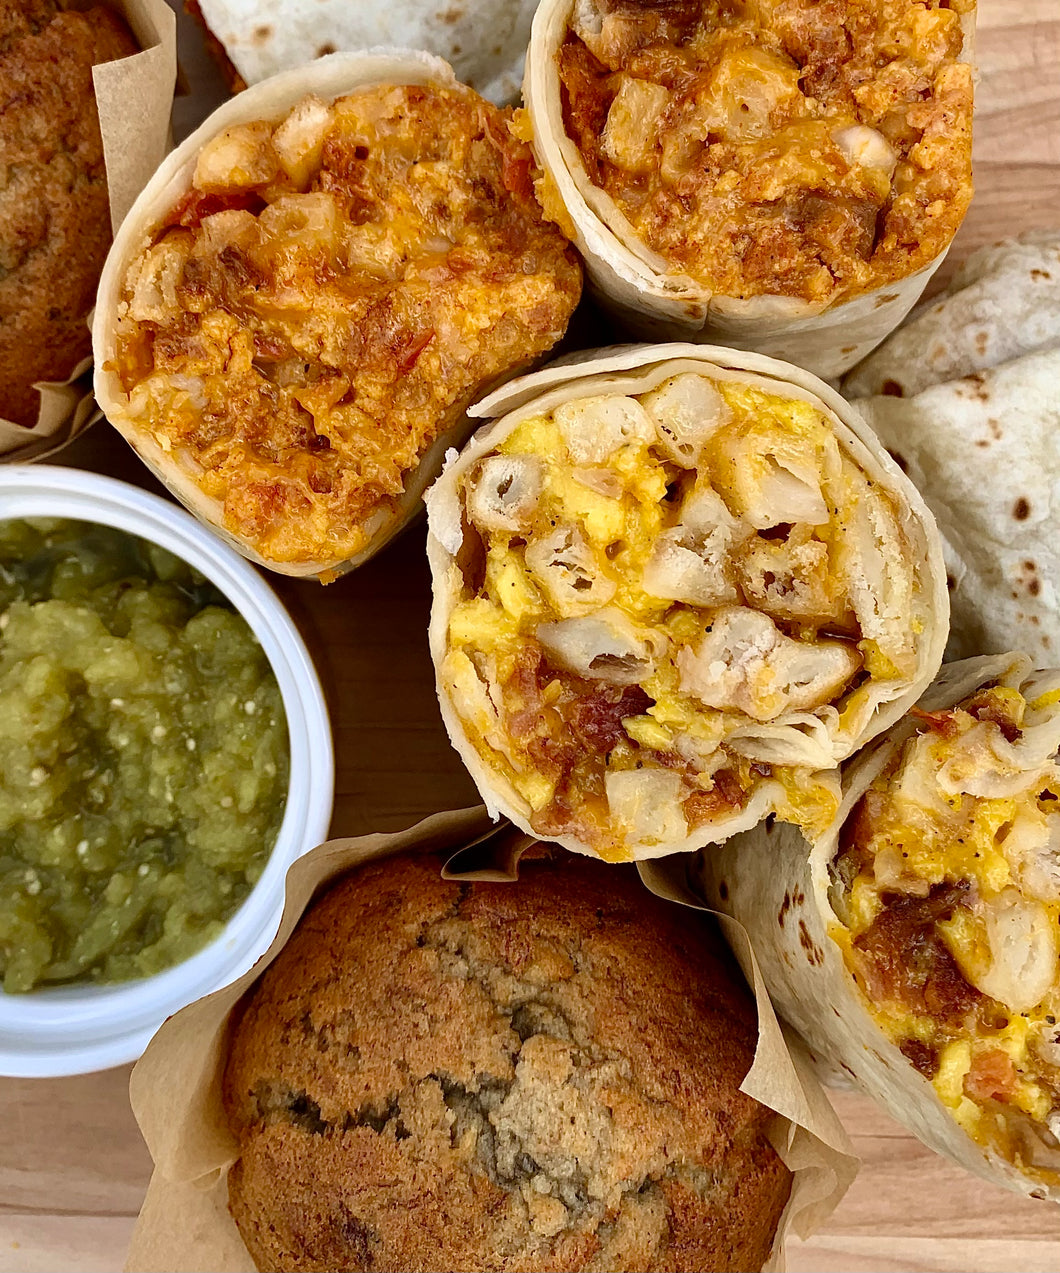 Catering Order - Burrito and Muffin (Min order of 10)